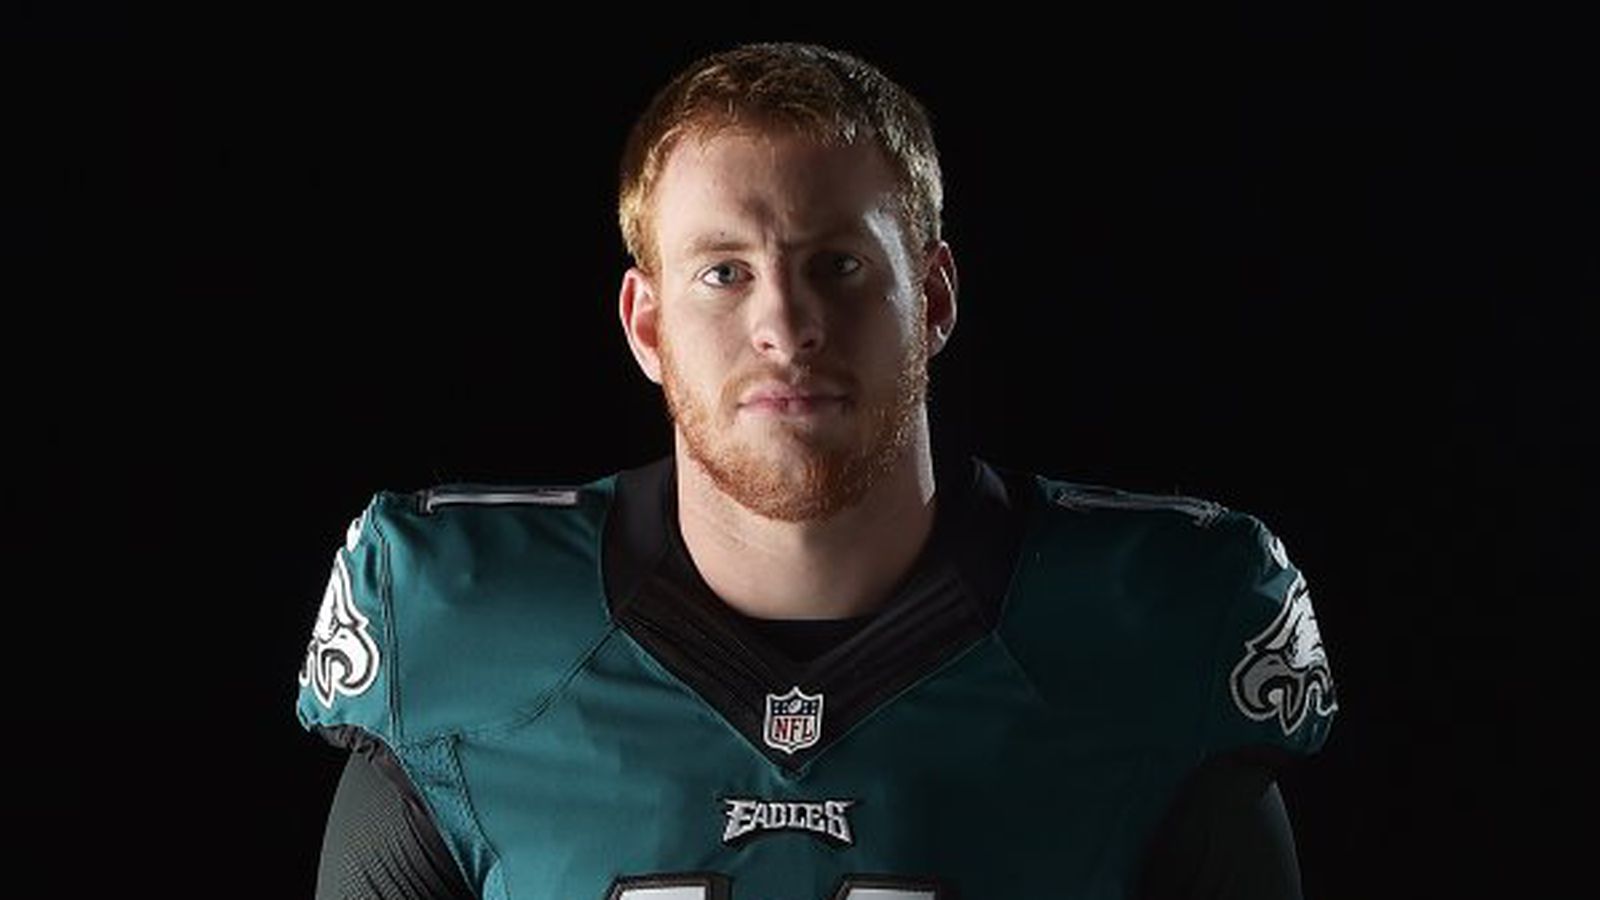 Here S Your First Look At Carson Wentz Wearing A